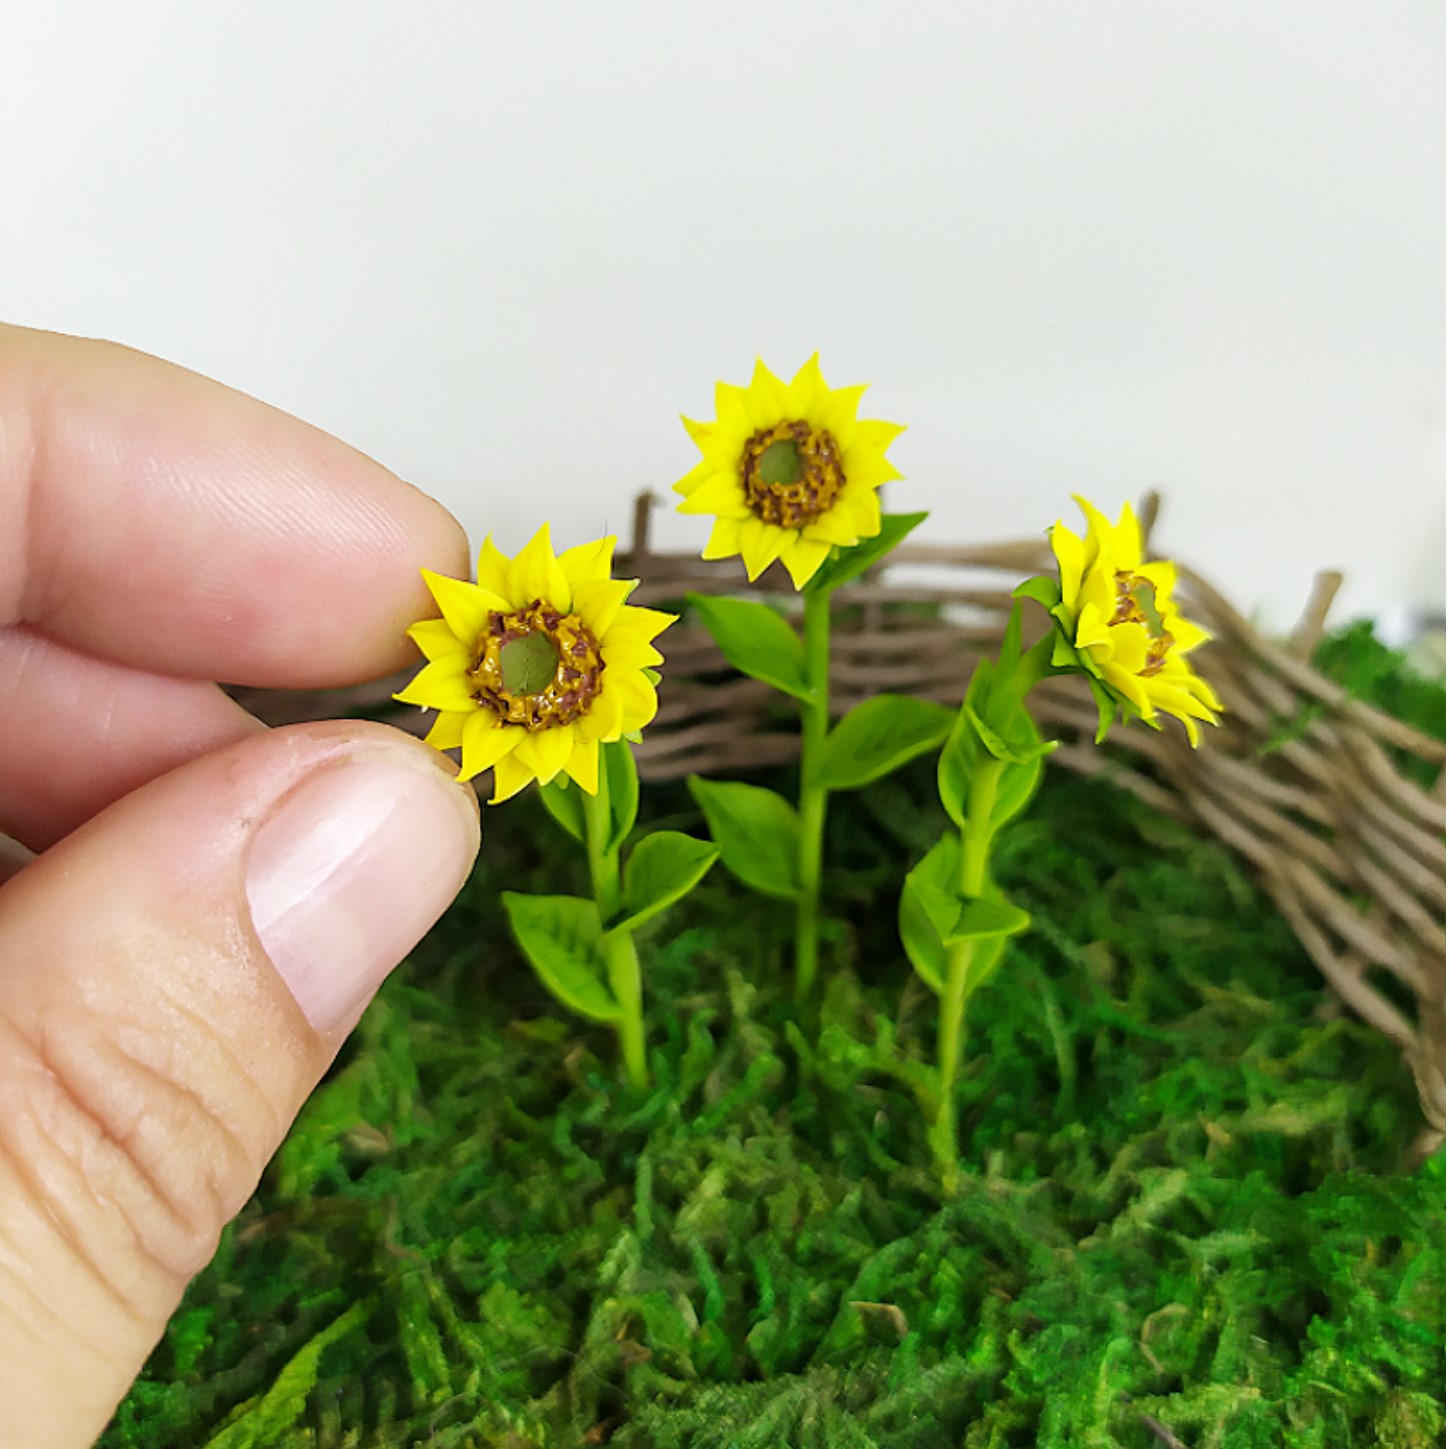 Miniature Flowers . Sunflower 1:12 Scale , Accessories for a